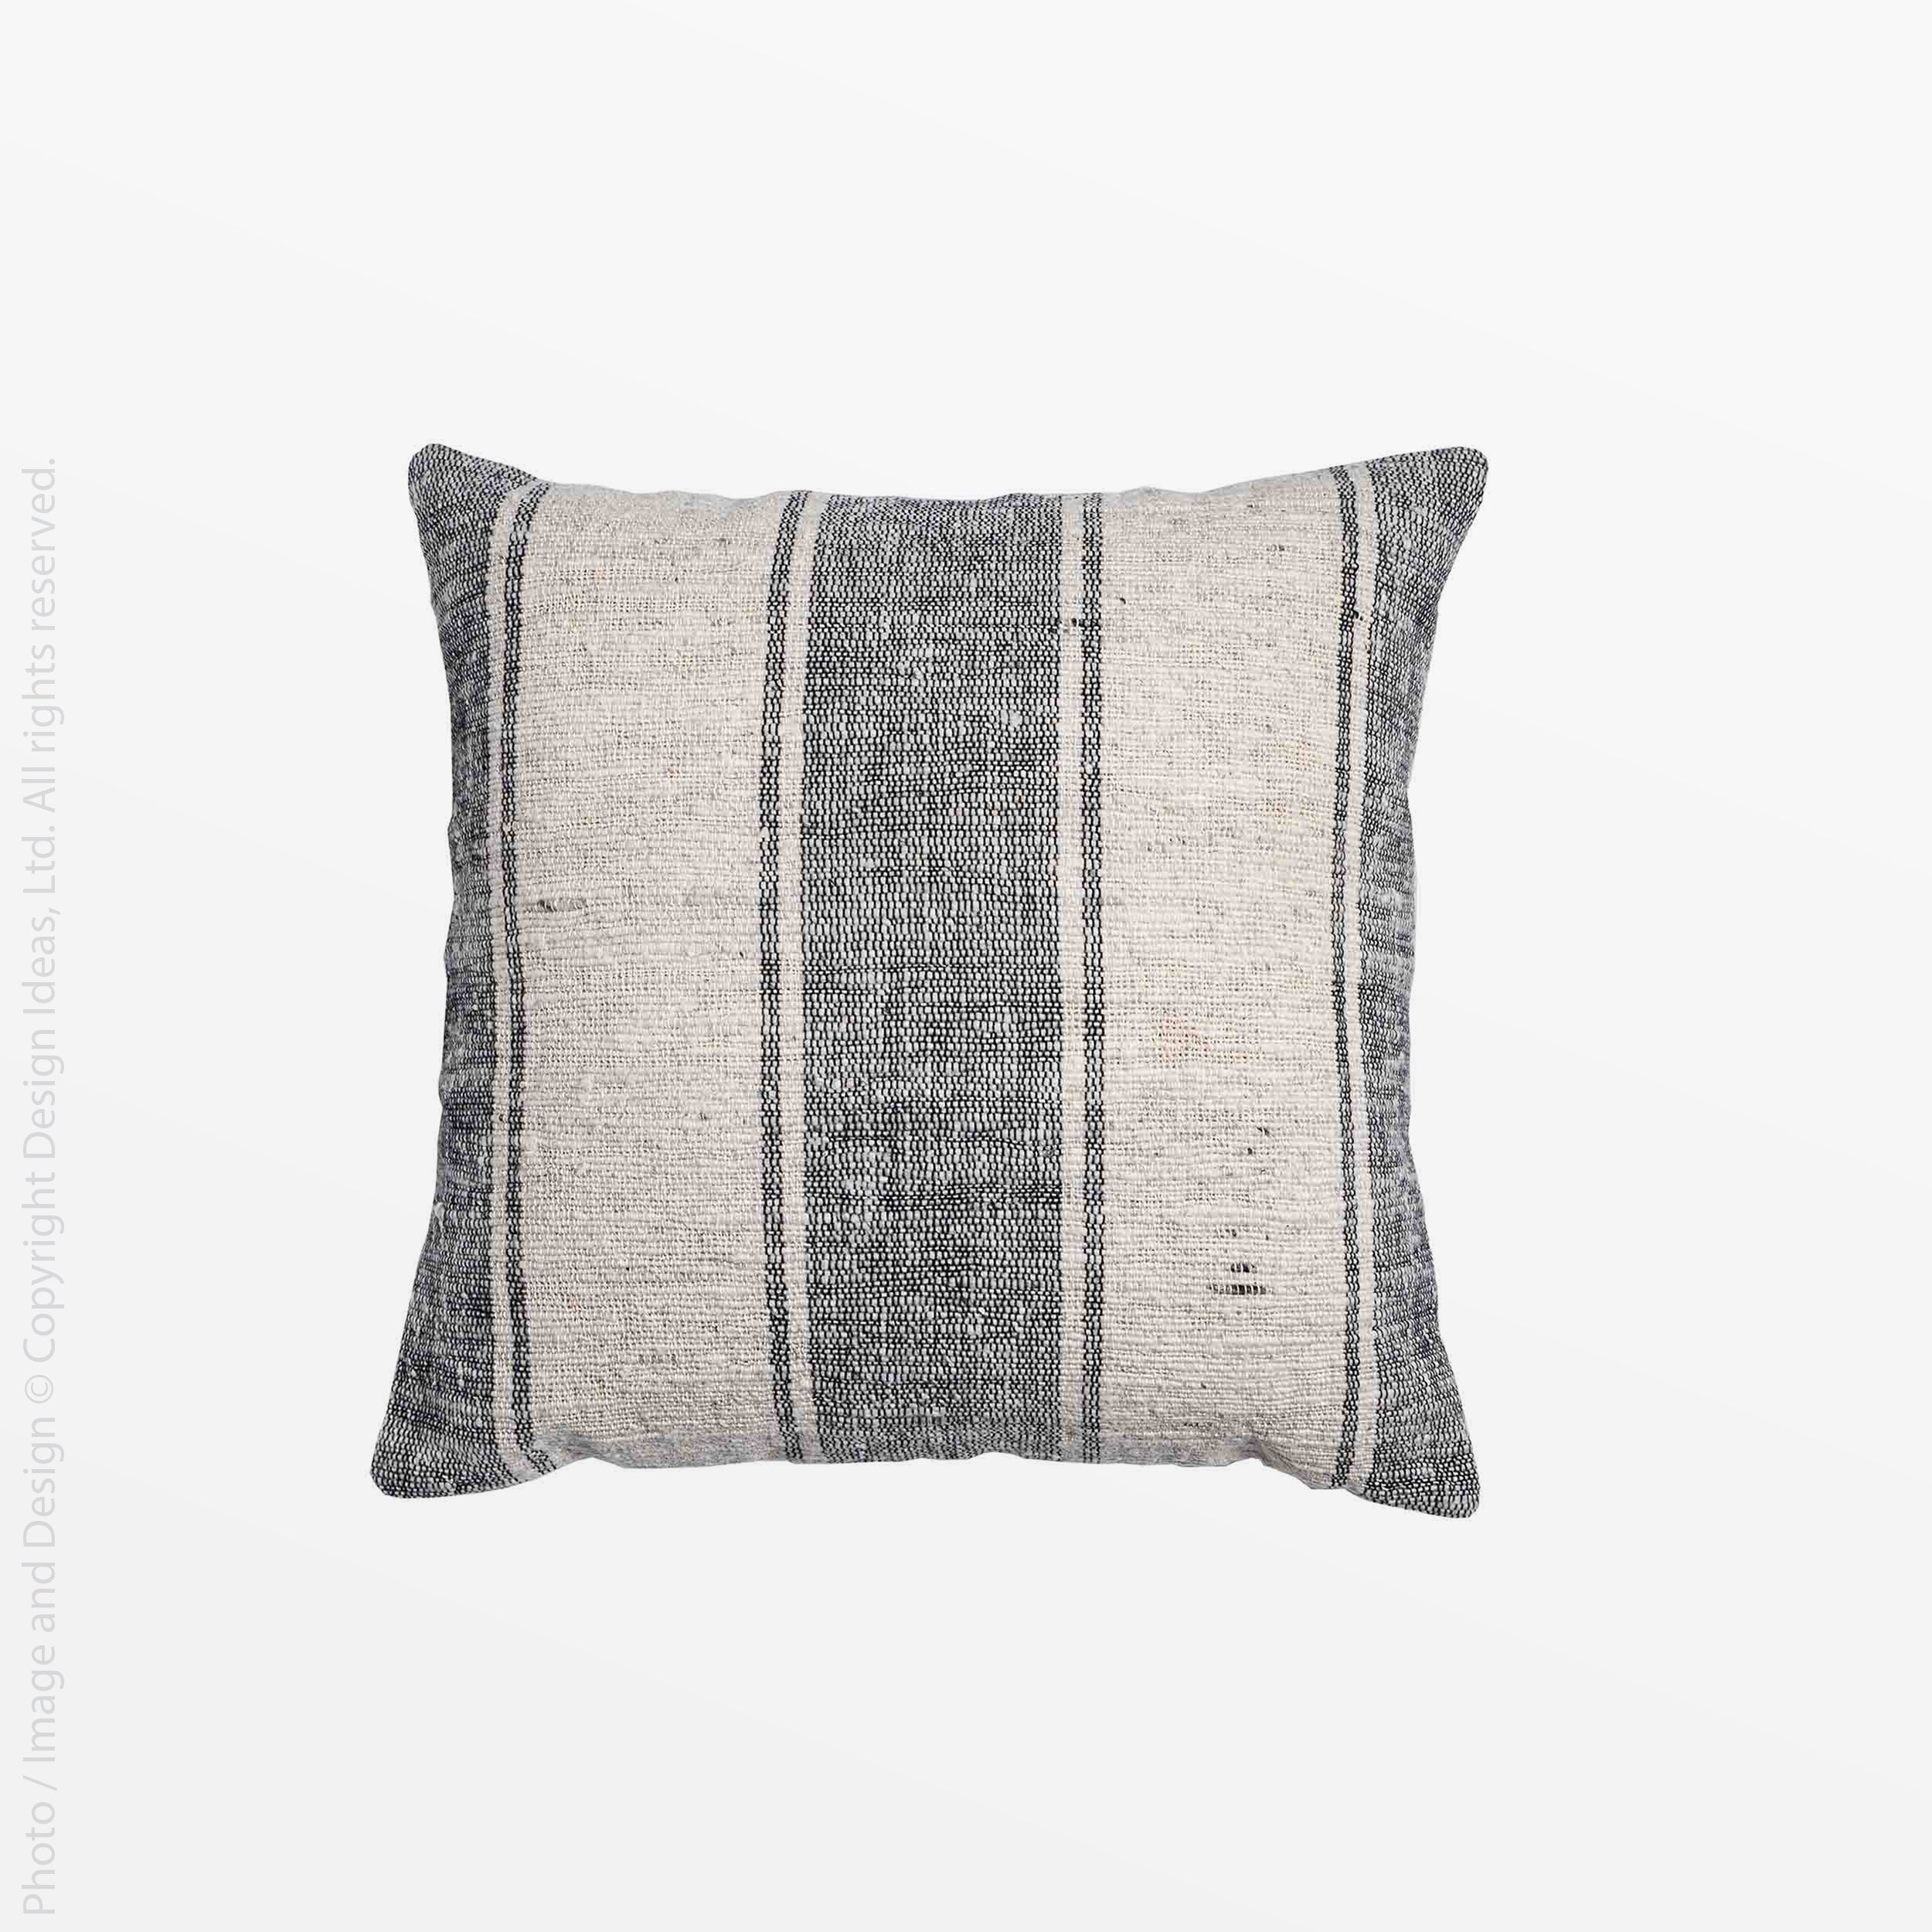 Holbeck™ cushion cover - Natural | Image 1 | Premium Cushion cover from the Holbeck collection | made with Cotton for long lasting use | texxture